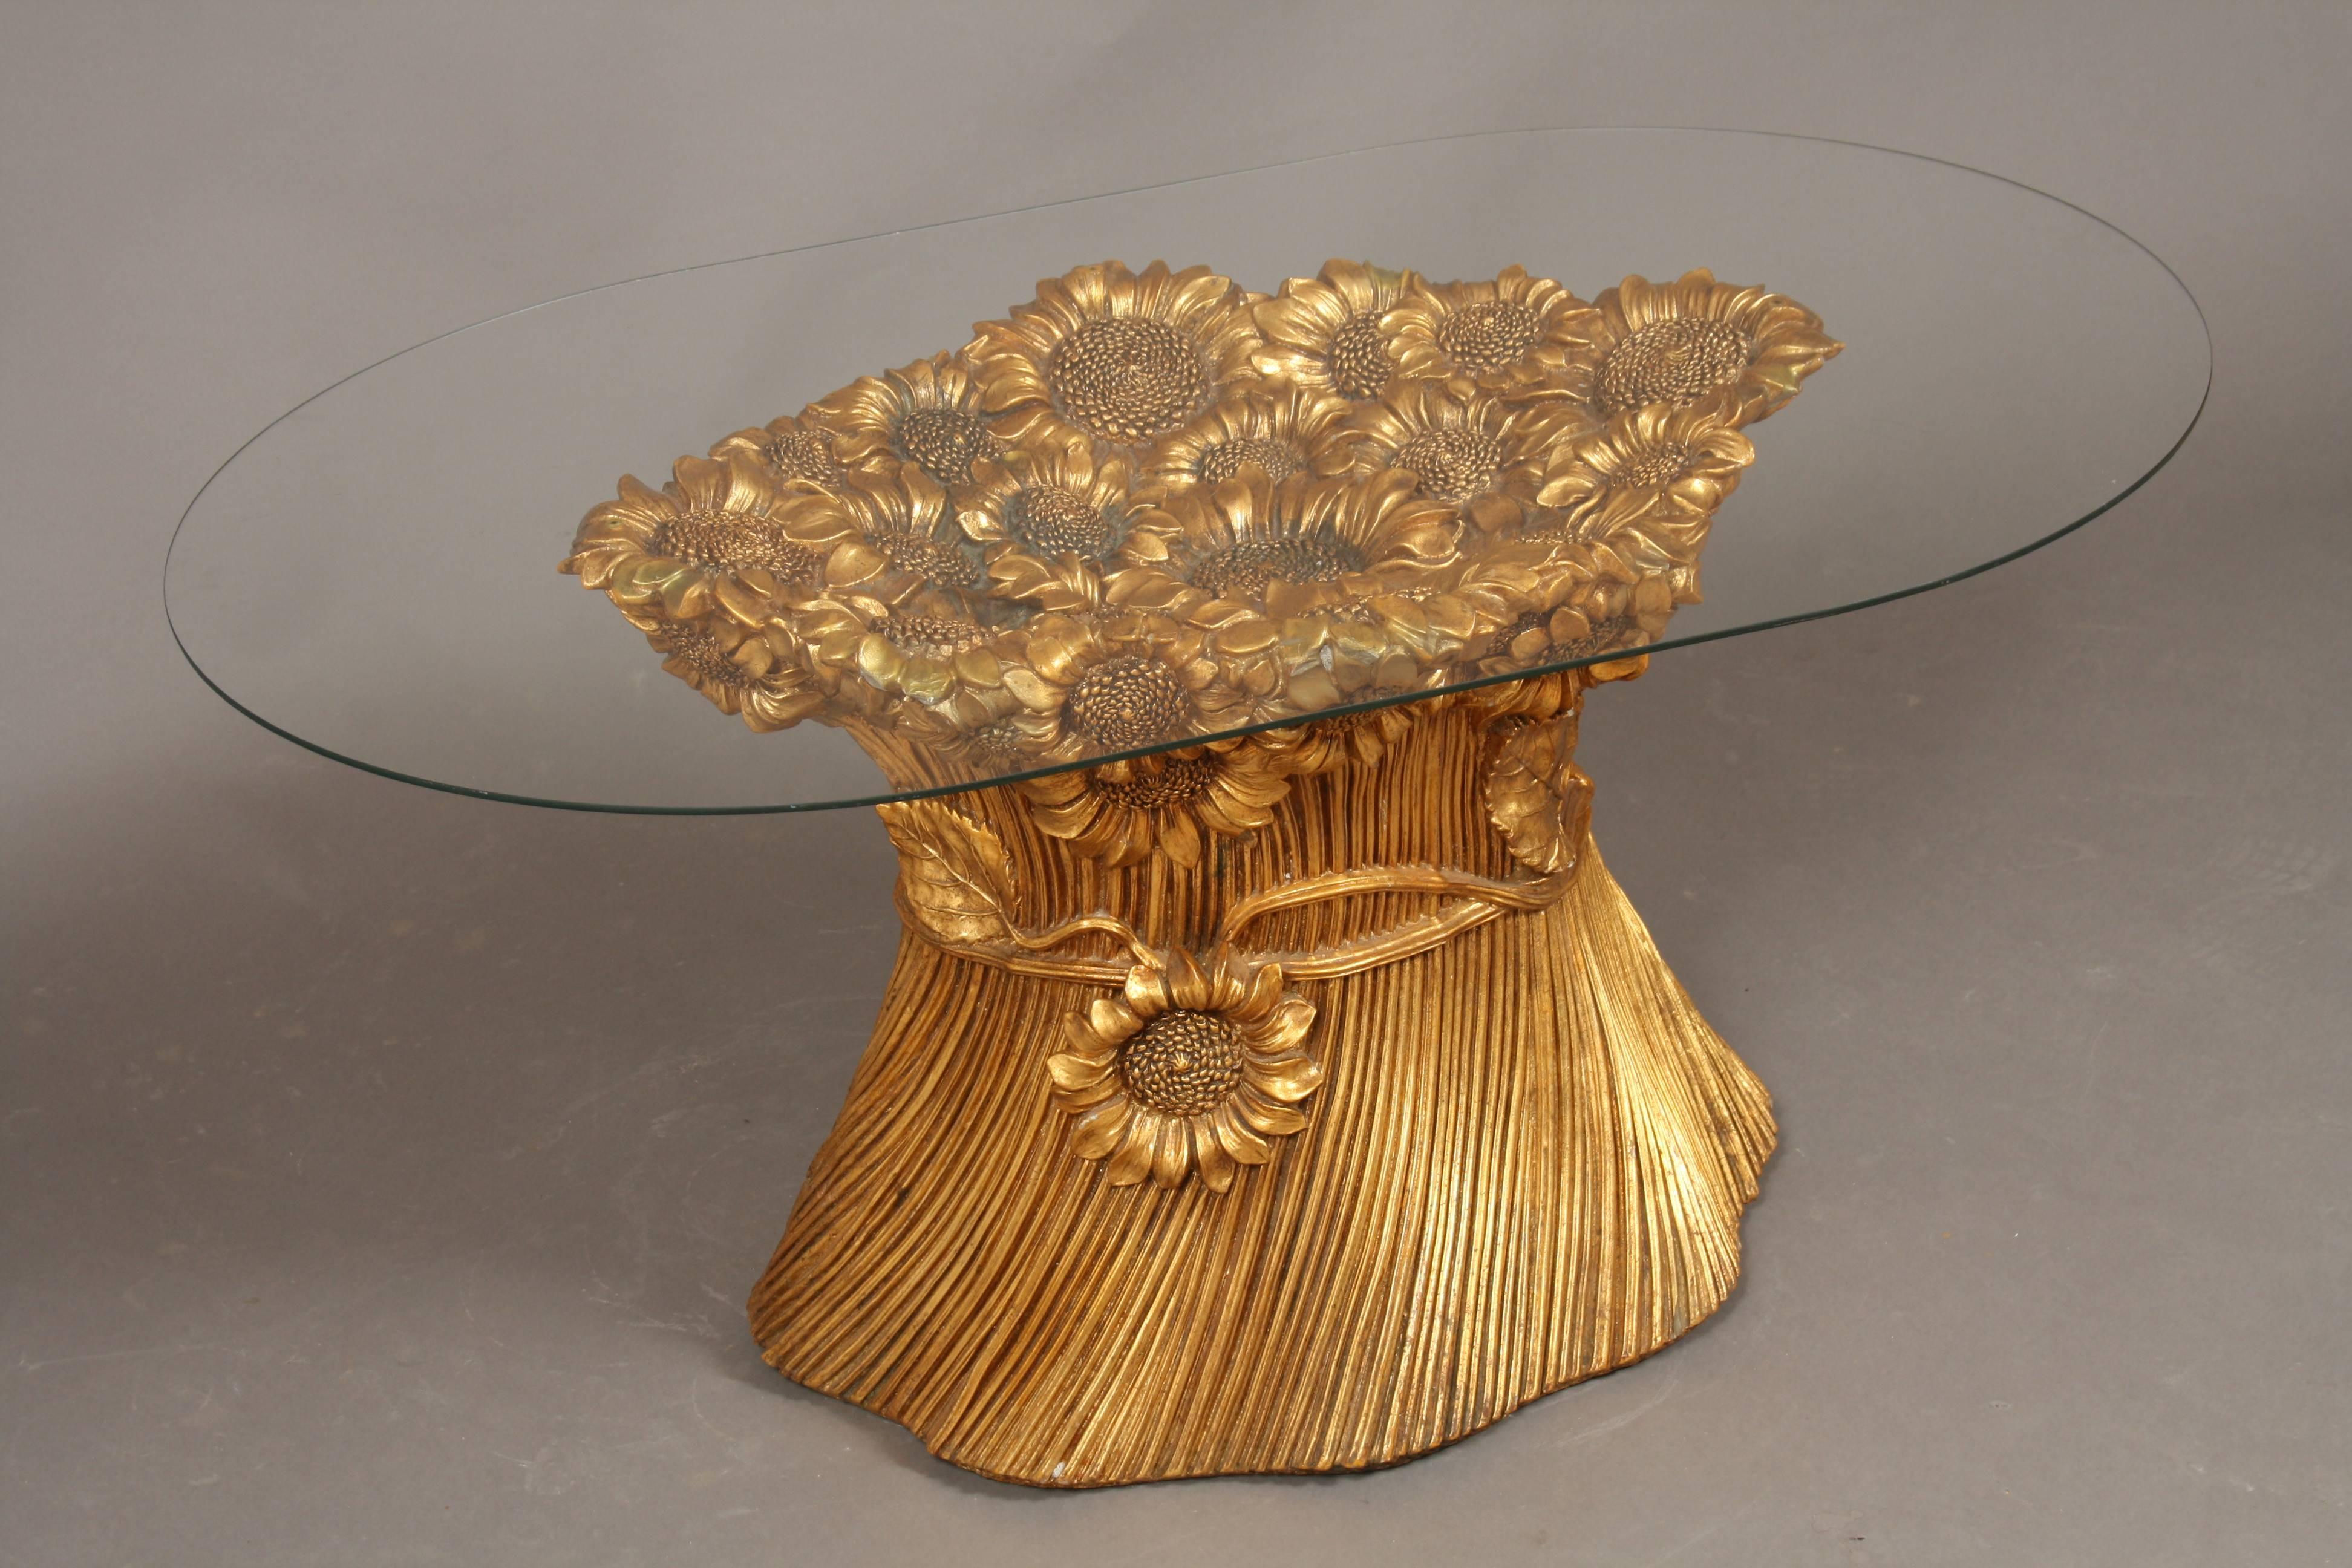 Regency golden sunflower coffee table, Italy, Morex, 1970. Gorgeous Hollywood Regency coffee table made in the 1970s. The table base is made of plaster-like, hard material. The base has sunflowers on top and sides. Also beautiful leaves on sides.